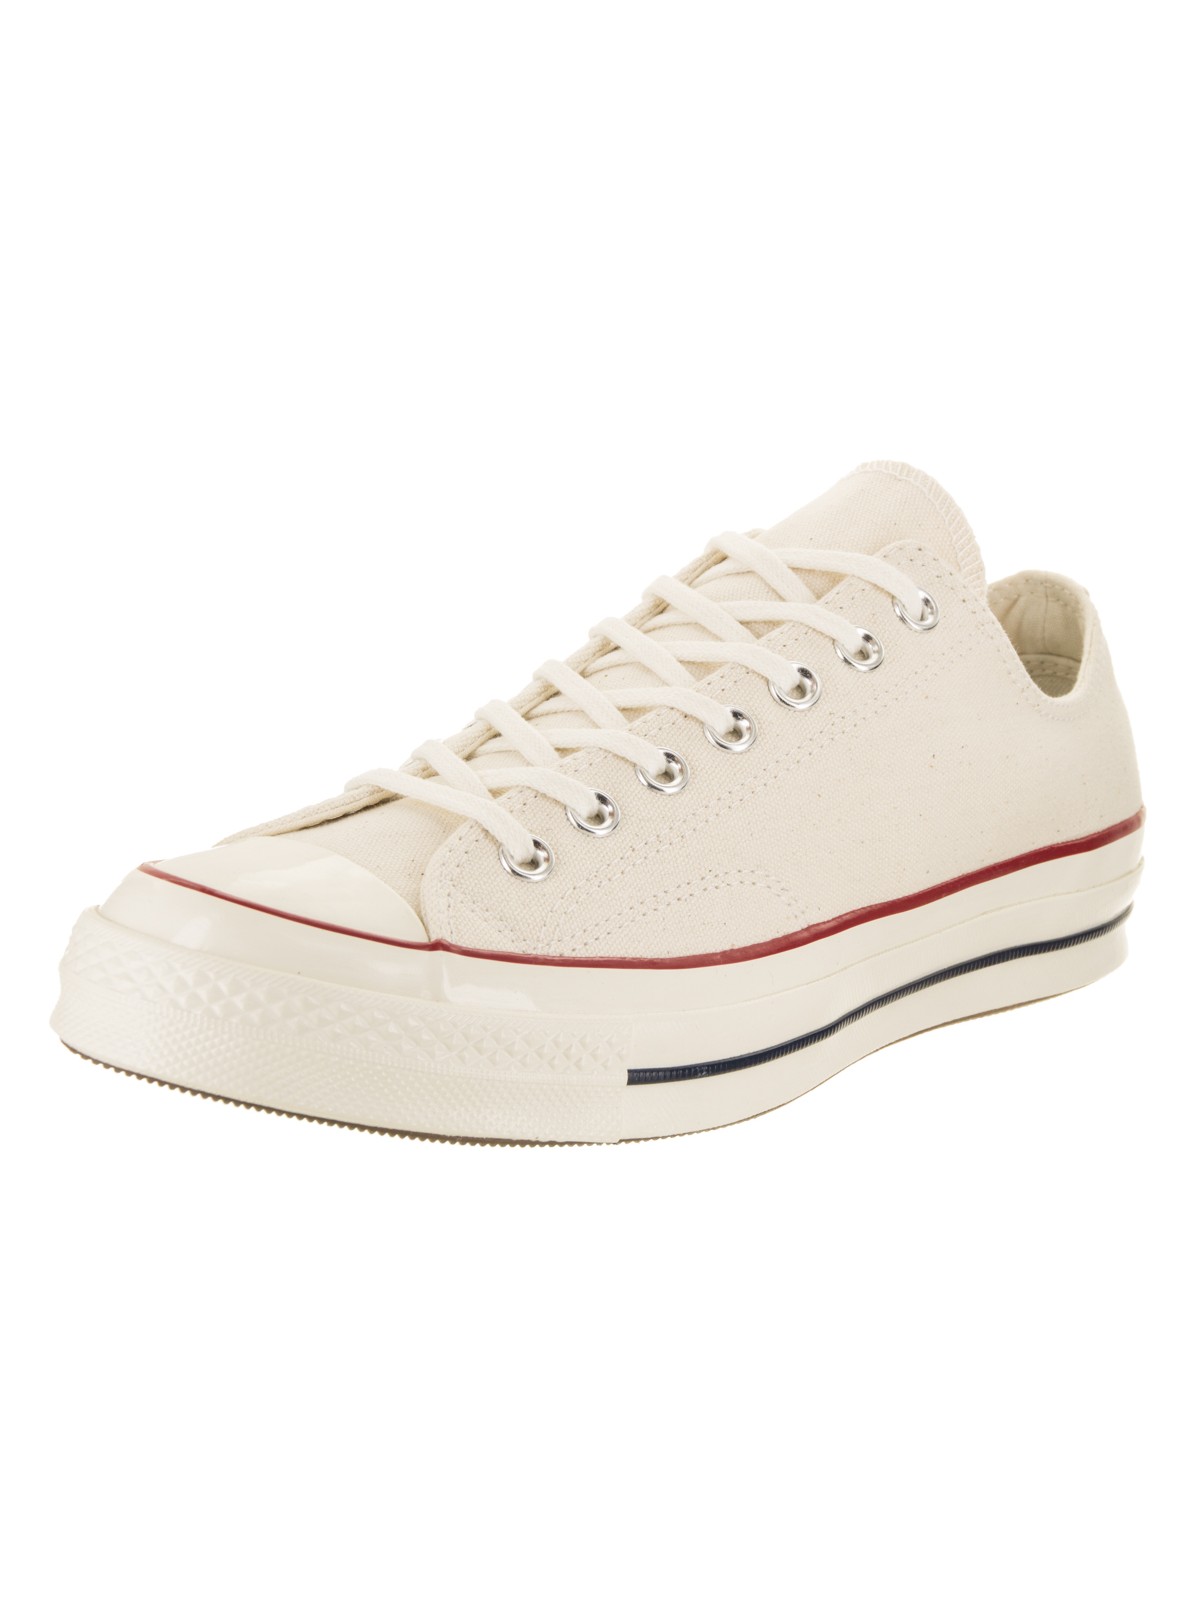 Converse Unisex Chuck Taylor All Star 70 Ox Basketball Shoe - image 1 of 5